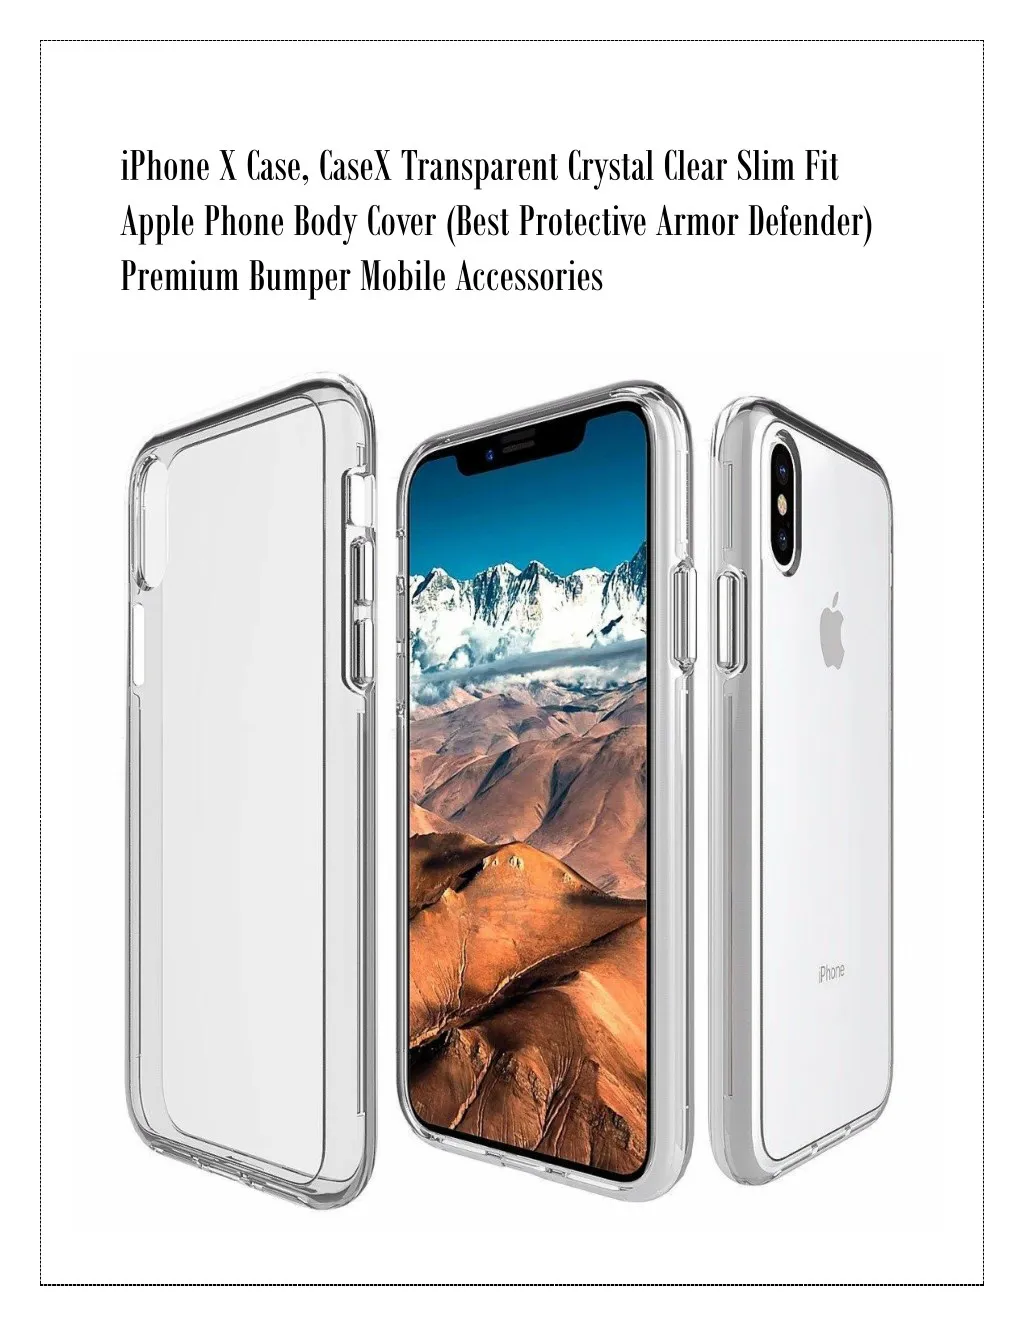 iphone x case casex transparent crystal clear